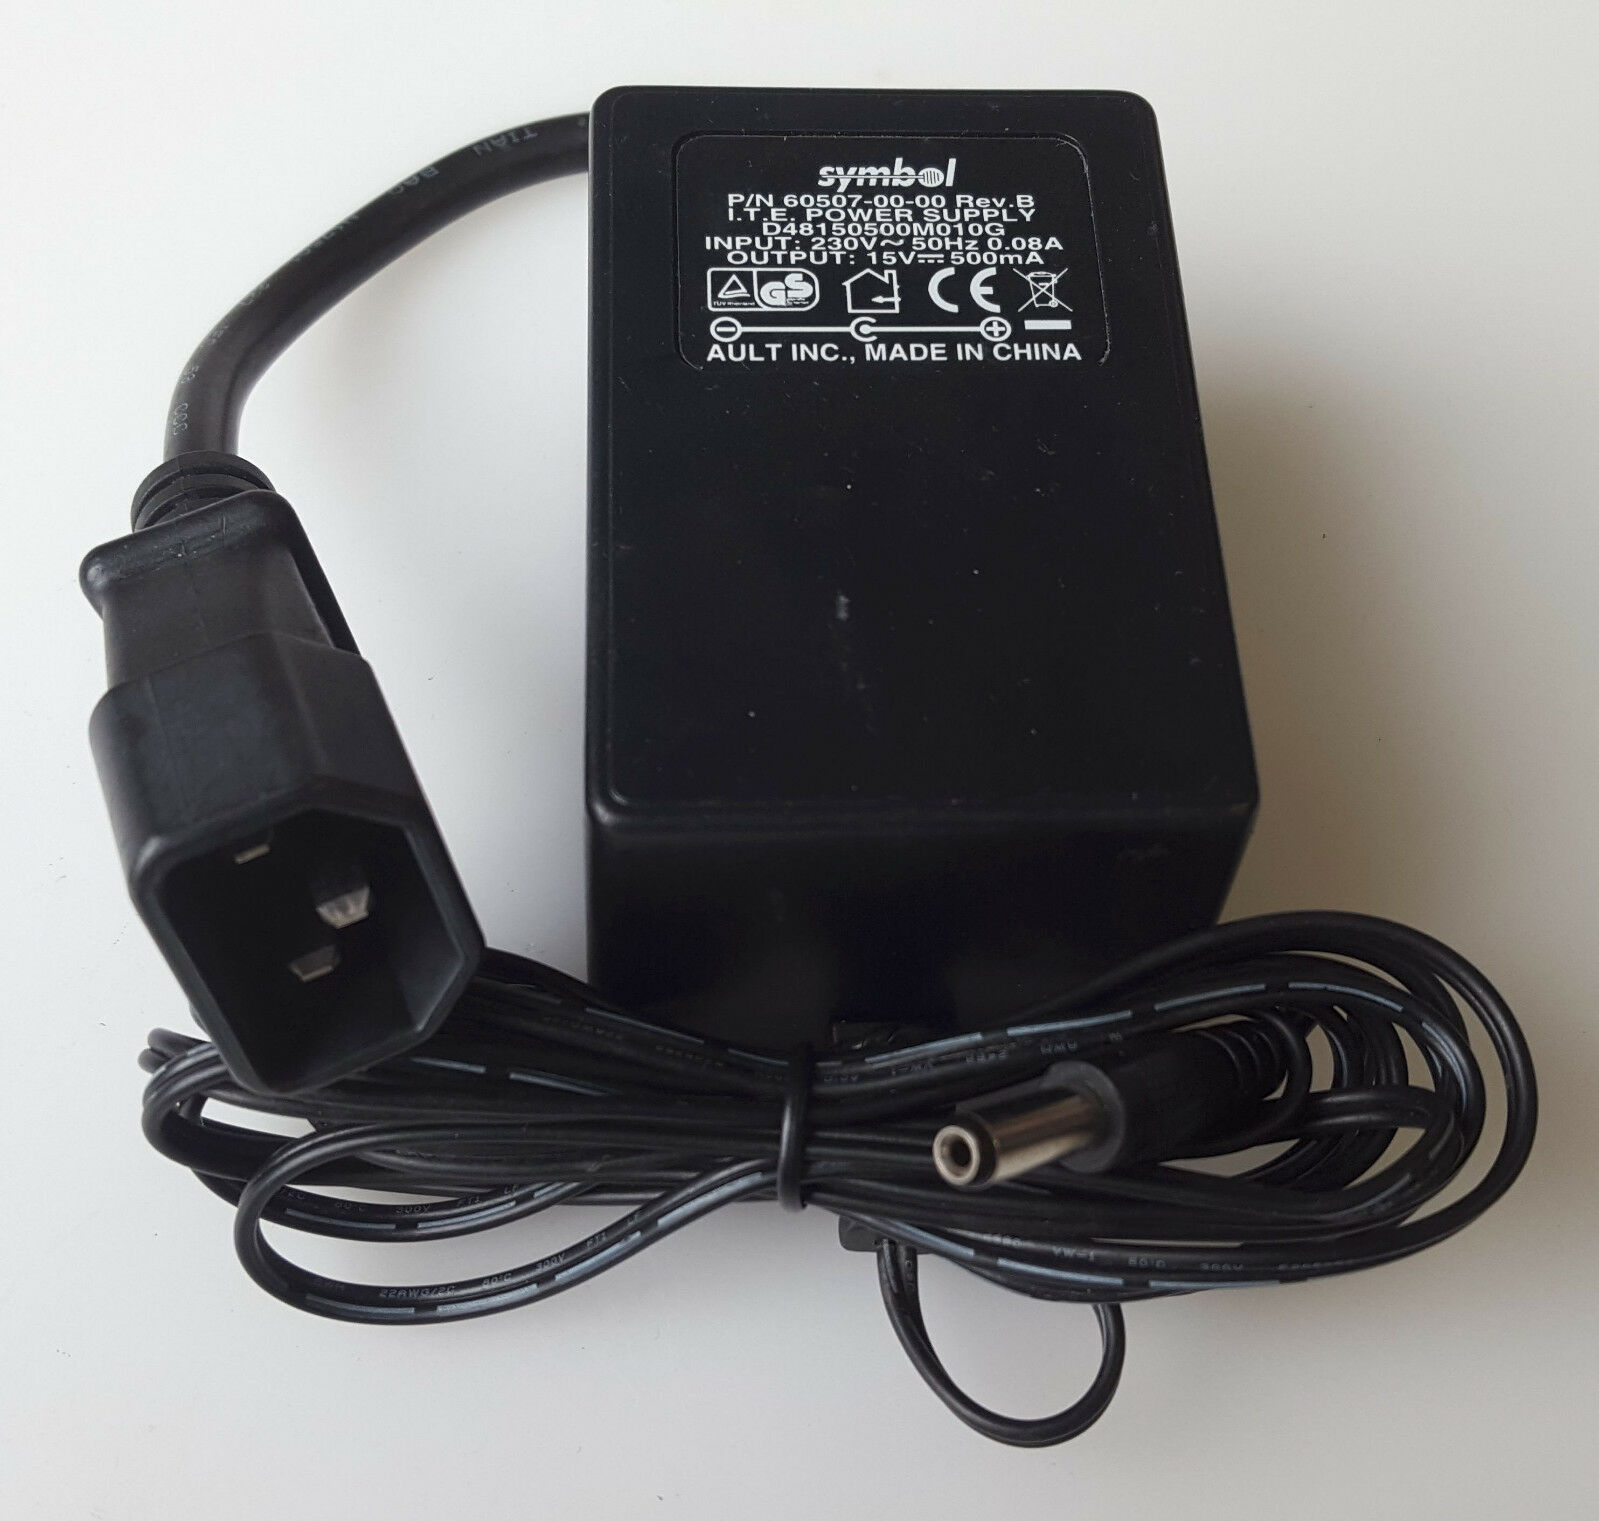 SYMBOL D48150500M010G AC/DC POWER SUPPLY ADAPTER 15V 0.5A 60507-00-00 REV. B Country/Region of Manufacture: China